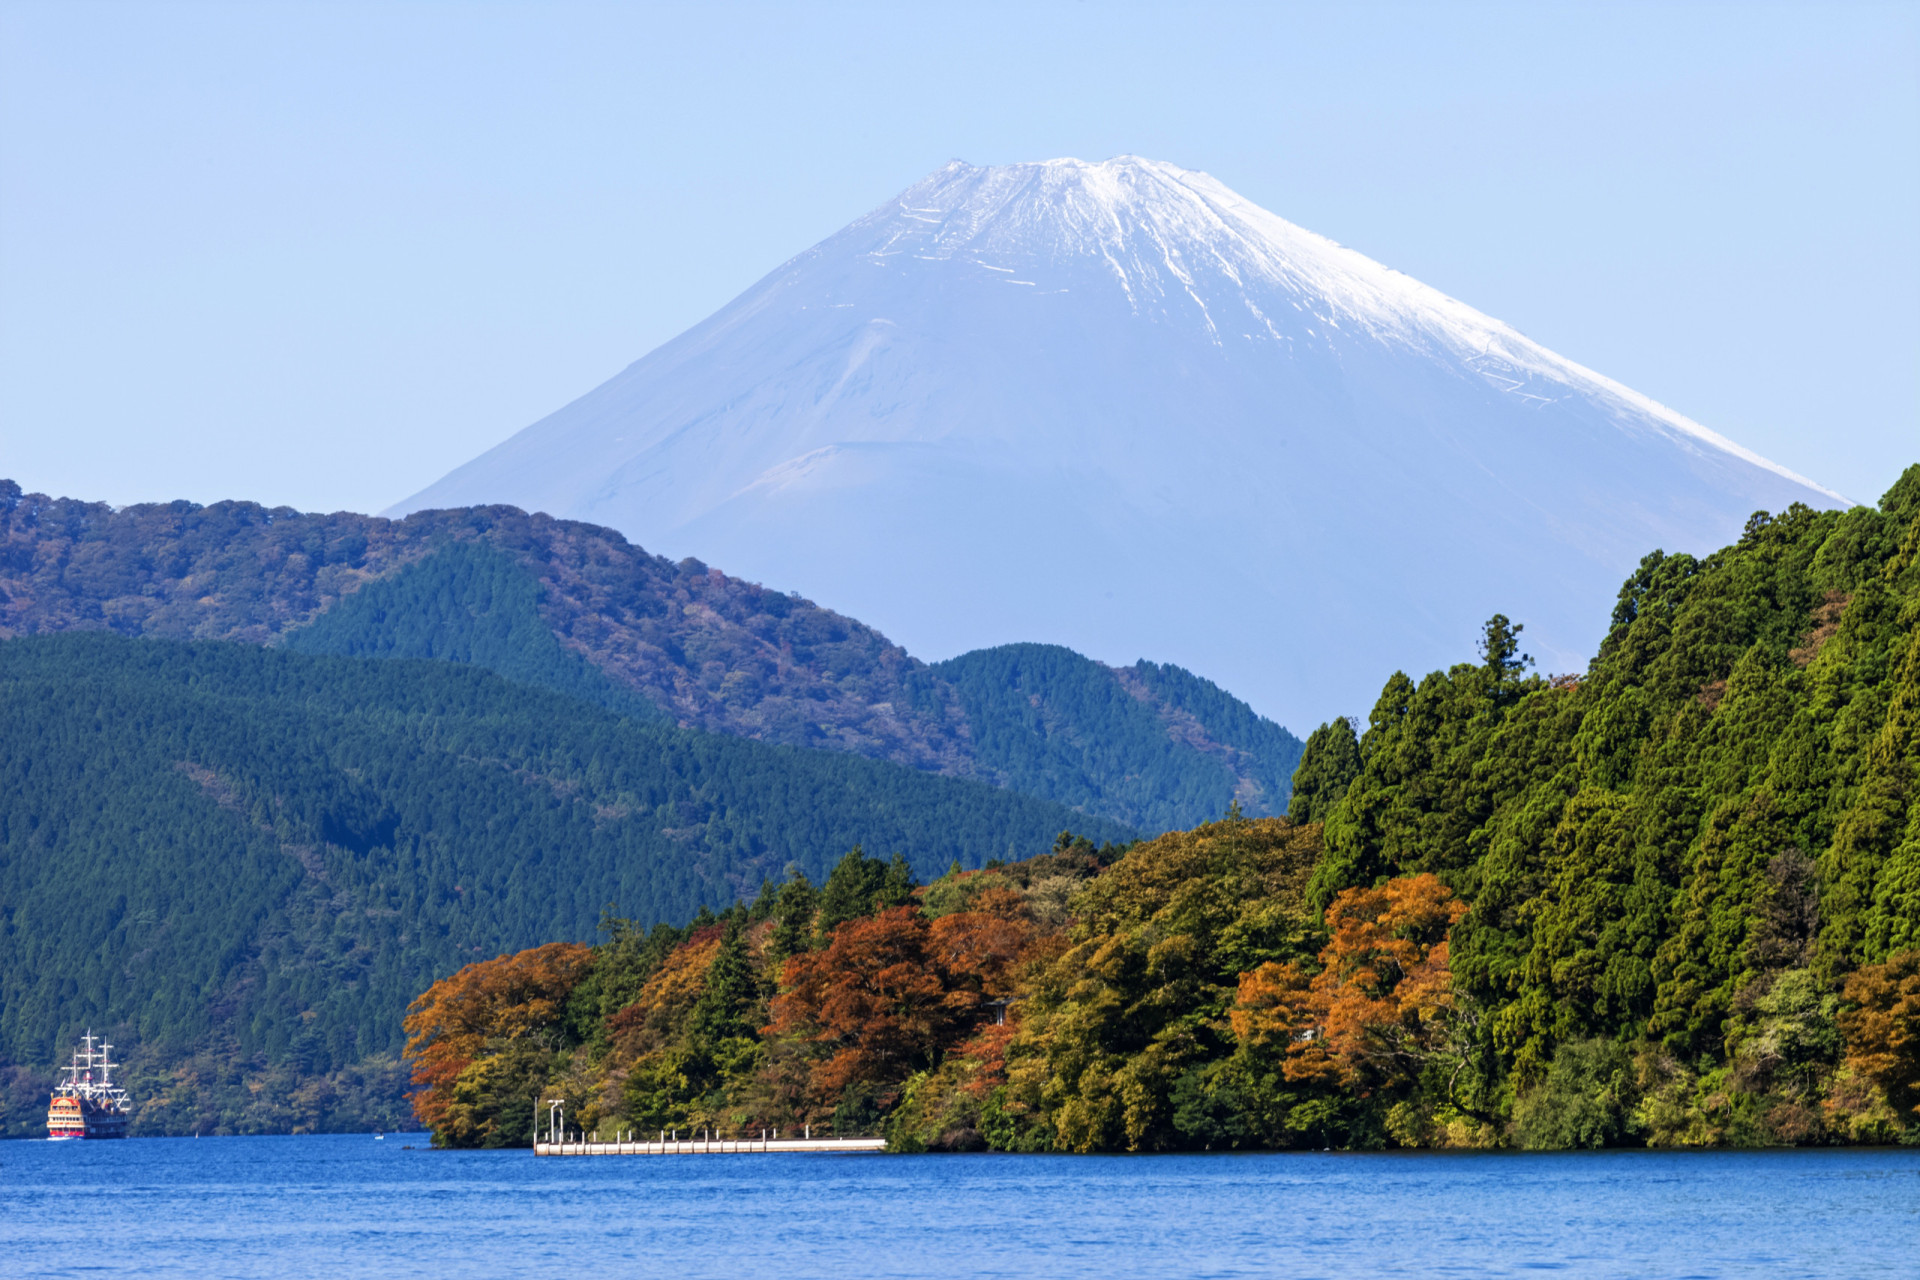 <p>This luxurious tour takes you to some of the most beautiful locations in Japan. From Tokyo to Kyoto, you'll experience majestic Japanese mountains and the gorgeous cherry blossoms.</p>